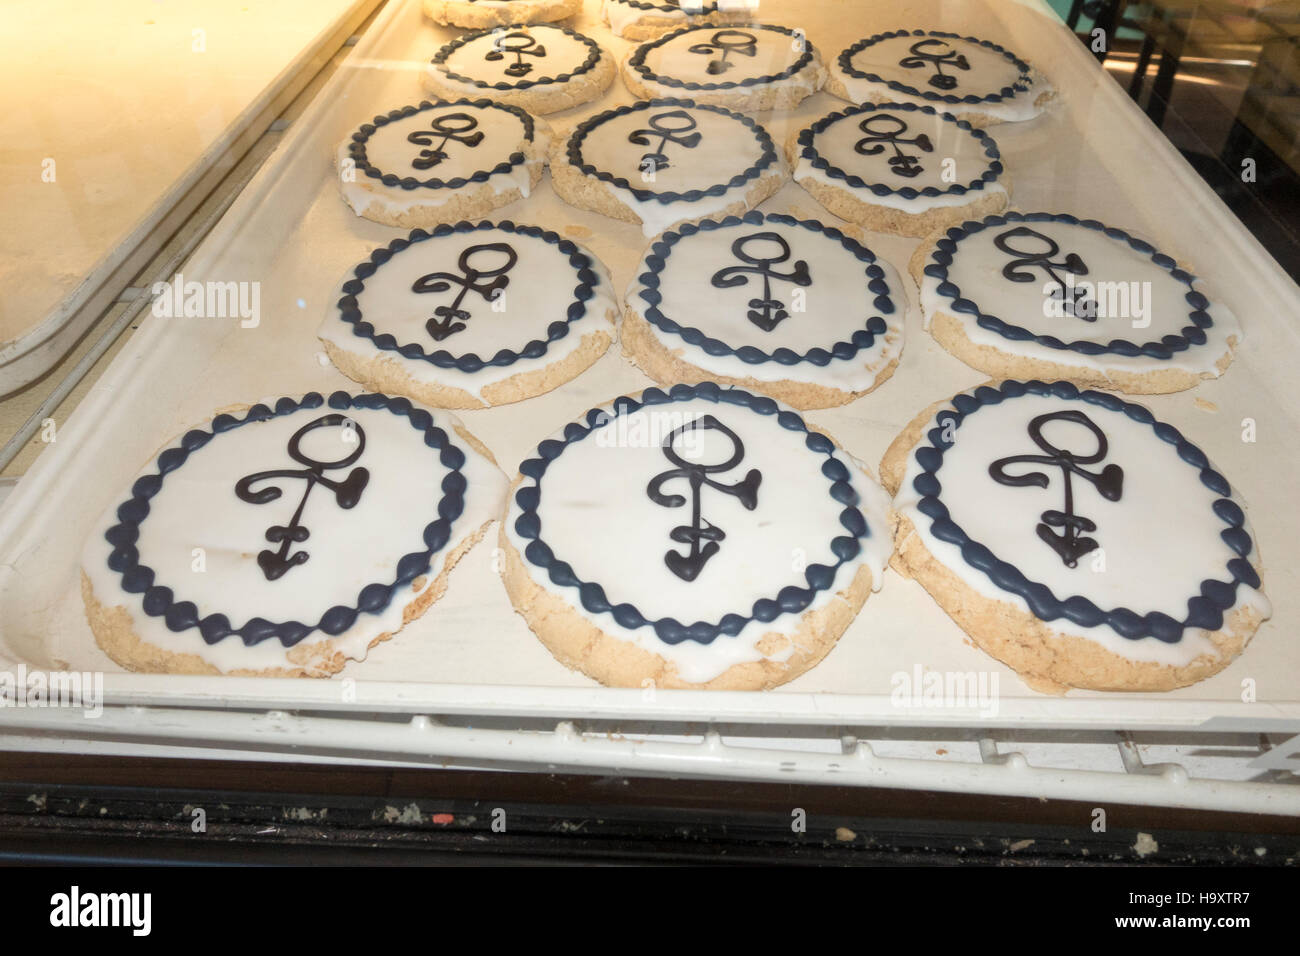 Sugar cookies found at the Mel-O-Glaze bakery with the Prince Love symbol applied to the frosting.  Minneapolis Minnesota MN USA Stock Photo